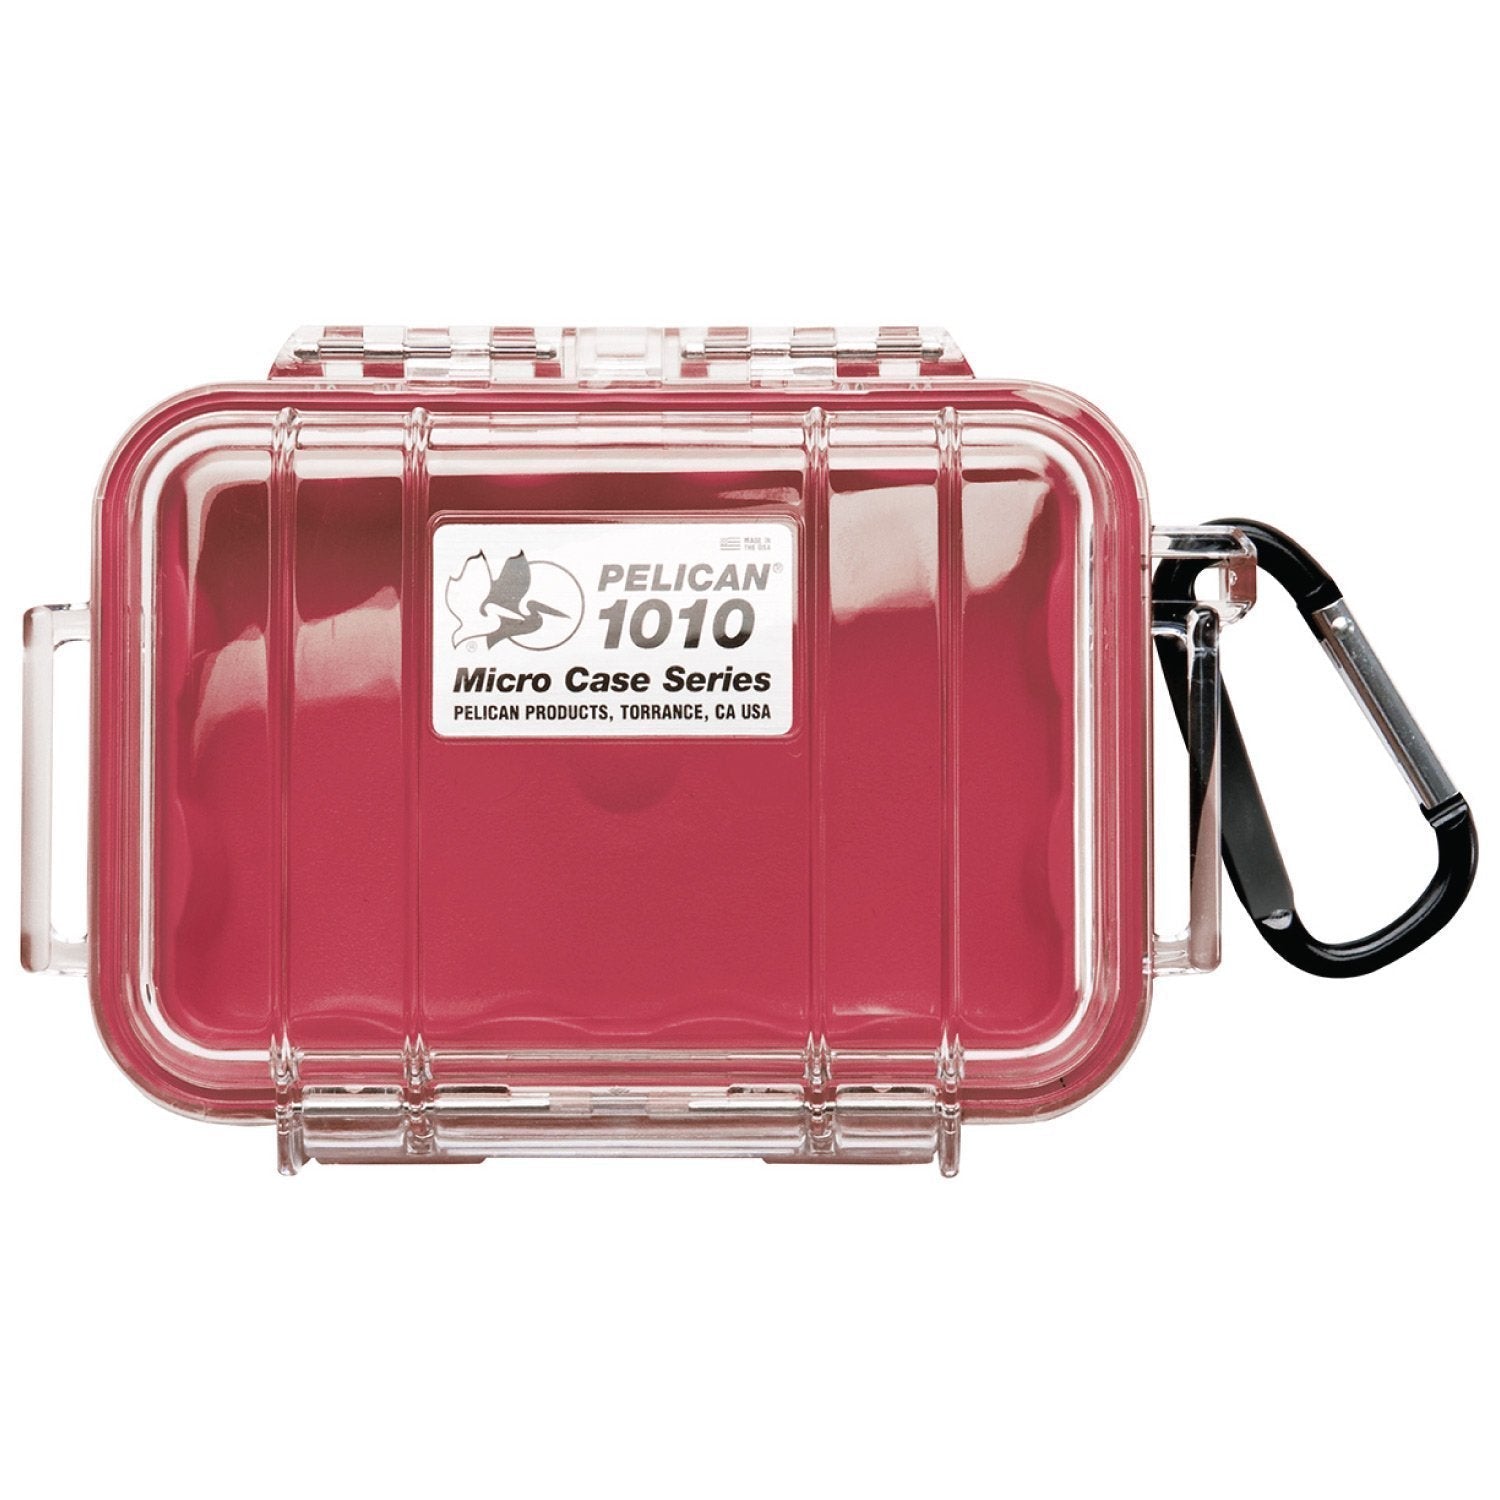 Pelican 1010 Micro Case Cases Pelican Products Clear Shell with Red Liner Tactical Gear Supplier Tactical Distributors Australia